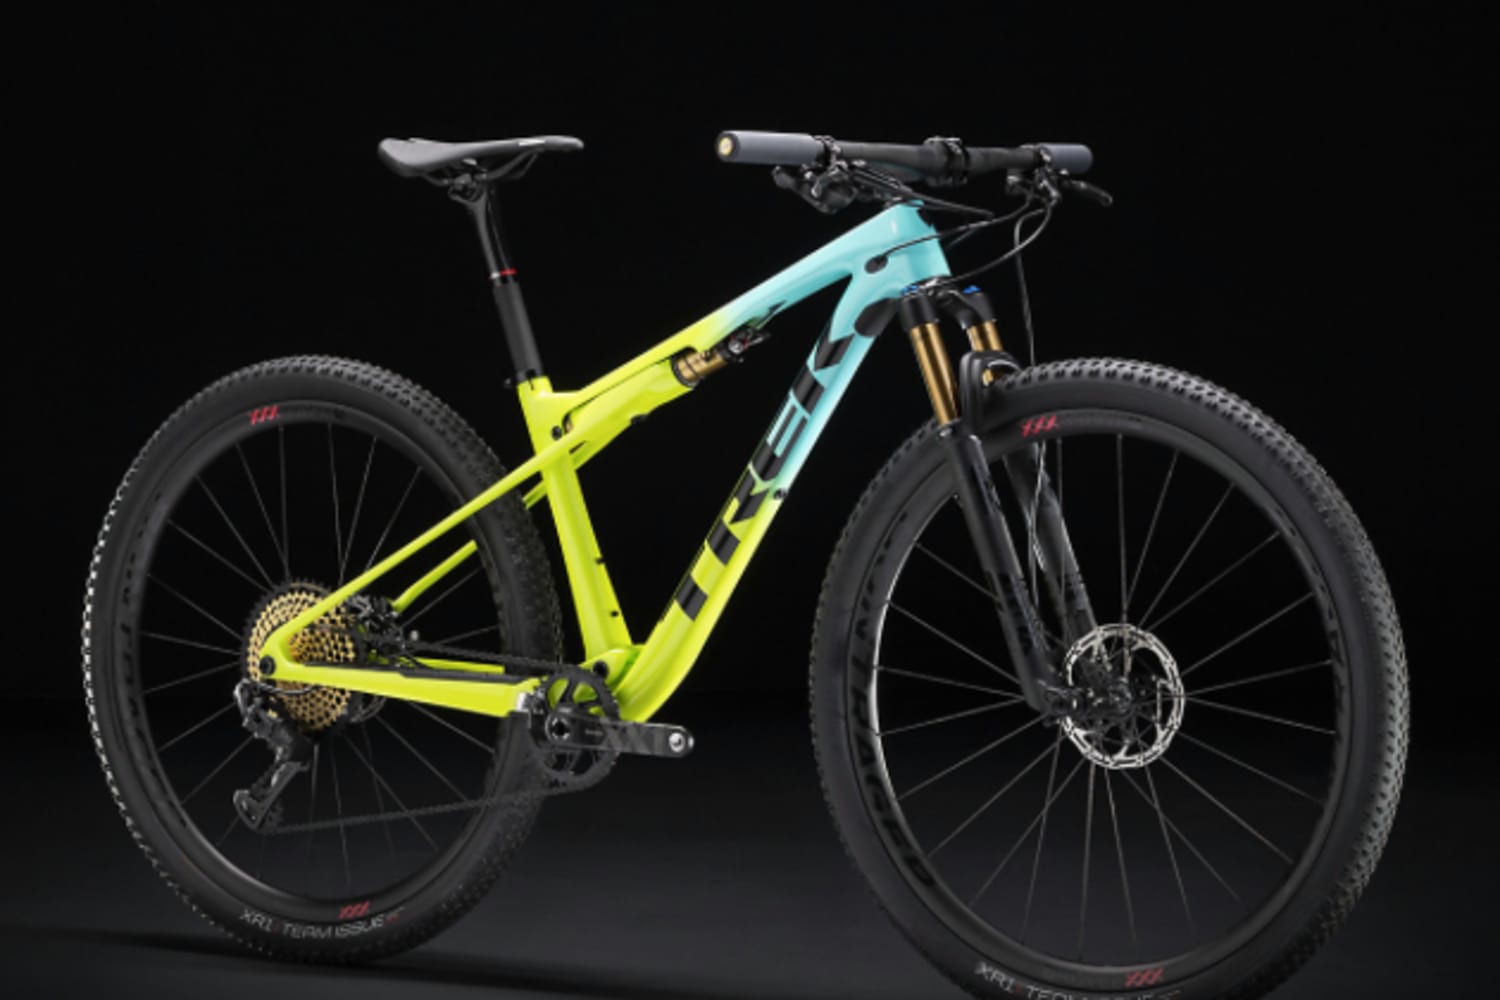 Best cross country bikes: These are the 